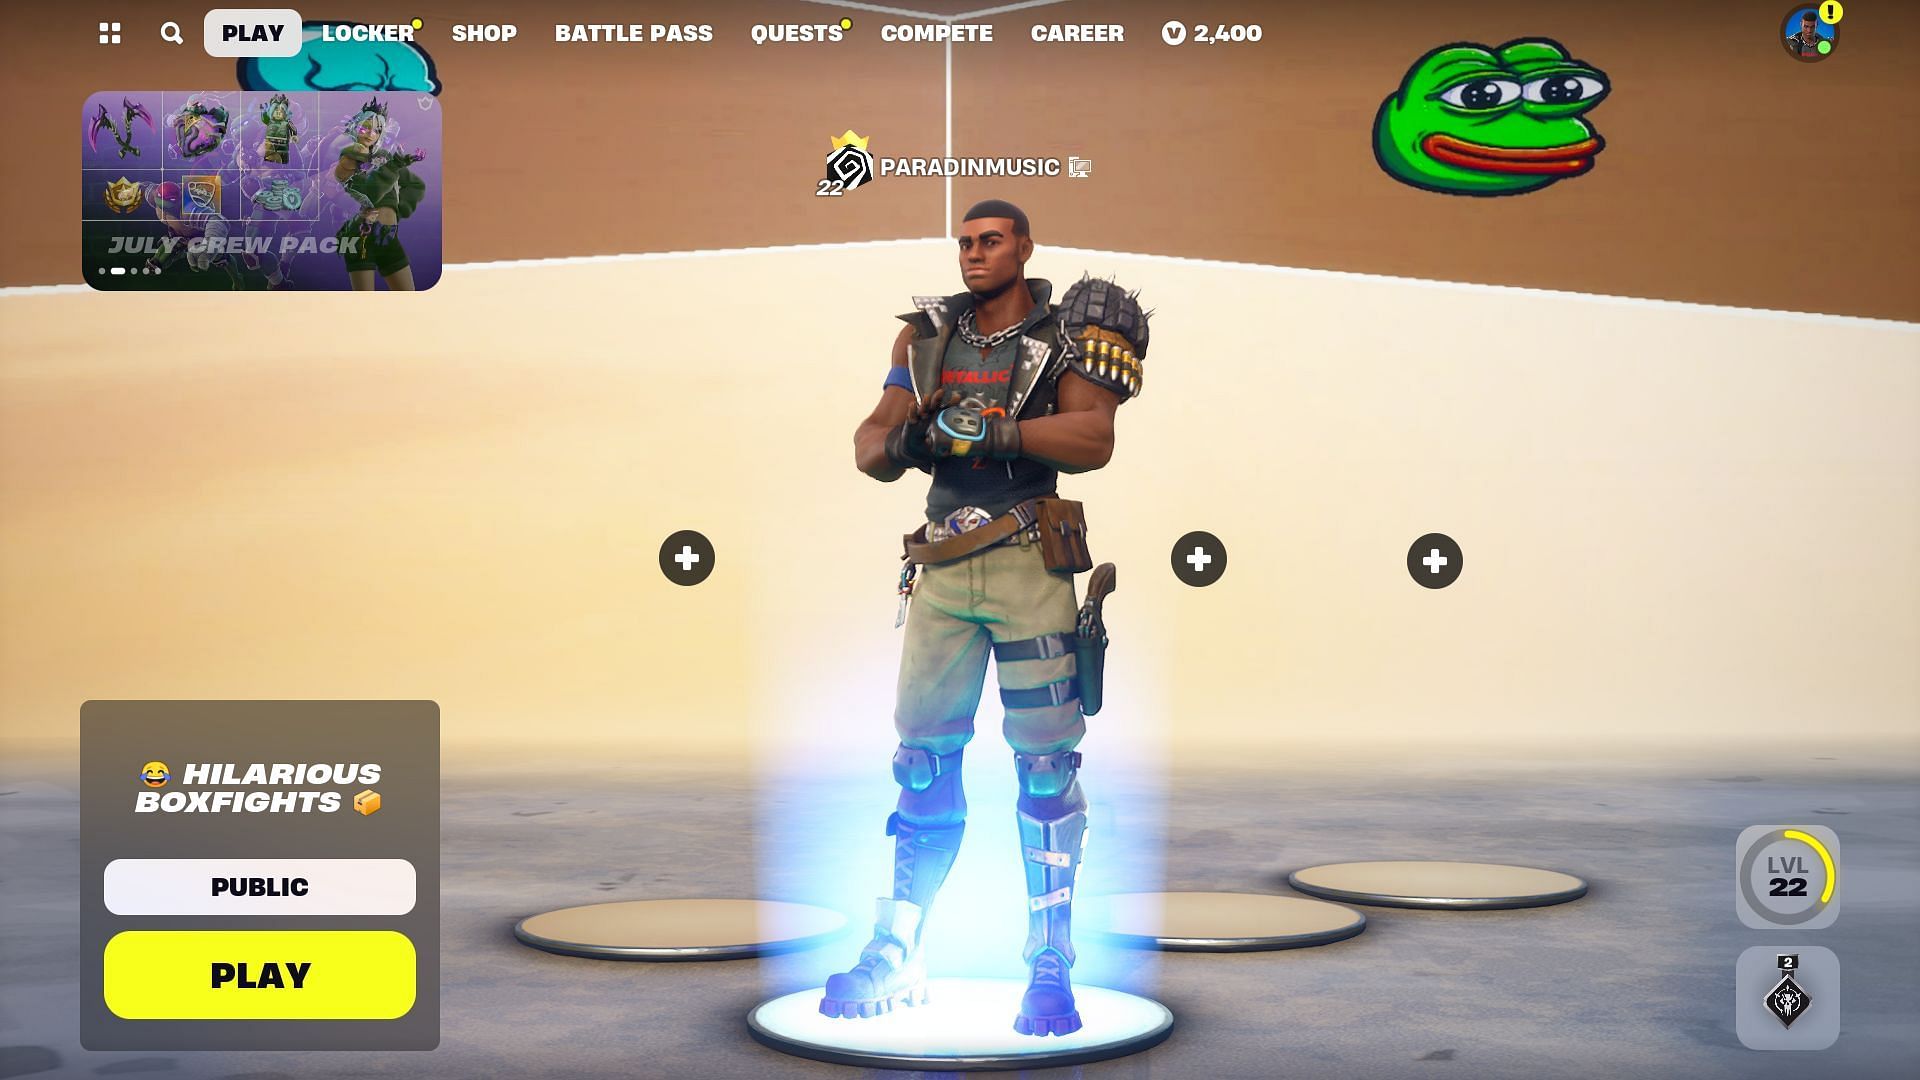 The Hilarious Boxfights lobby (Image via Epic Games)